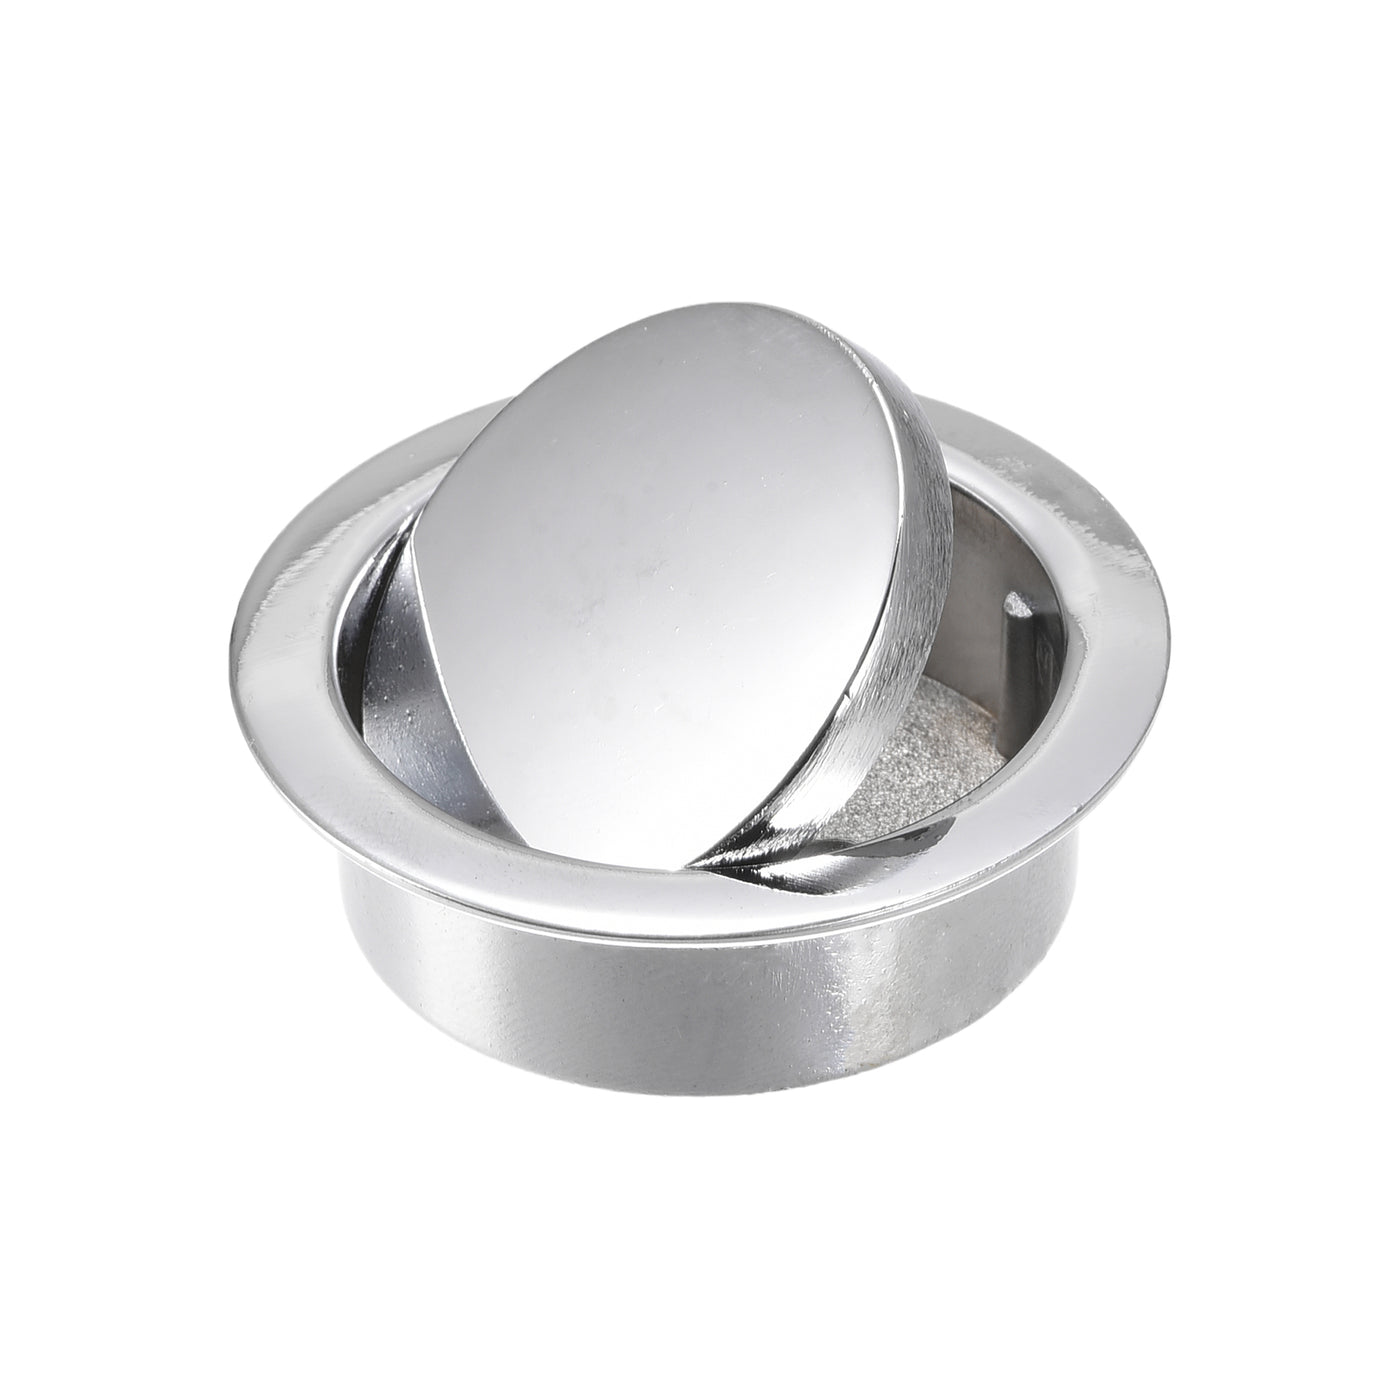 uxcell Uxcell Finger Flush Pull Handle Outer Dia. 42mm/1.65" Bright Silver with Plate